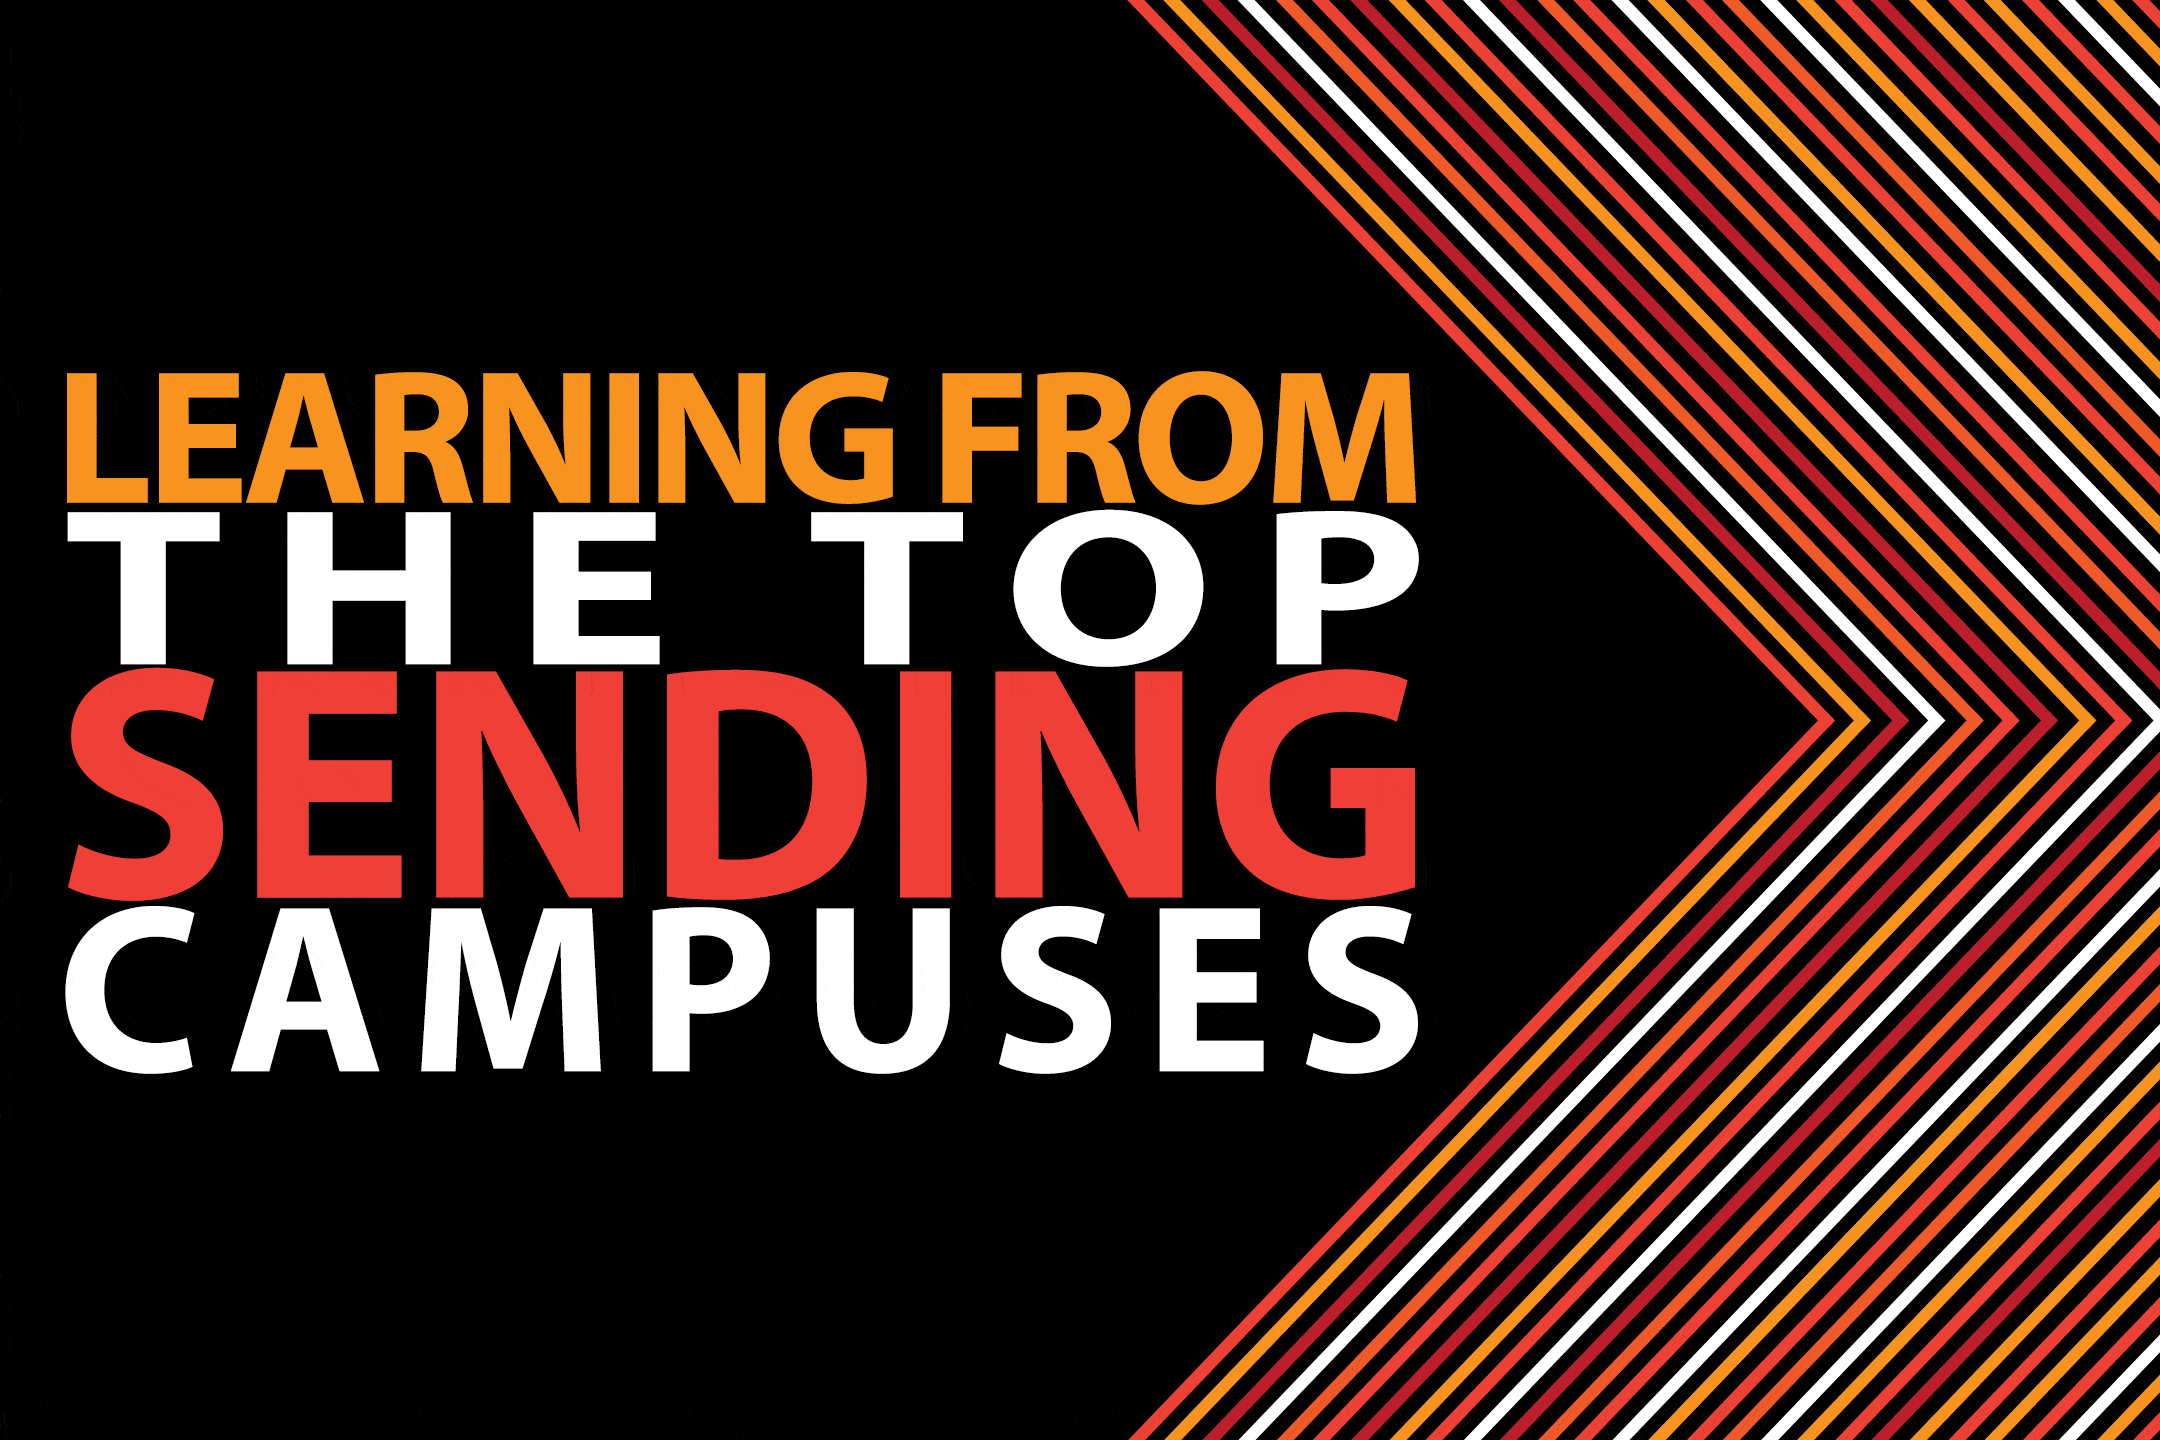 The-Top-Sending-Campuses